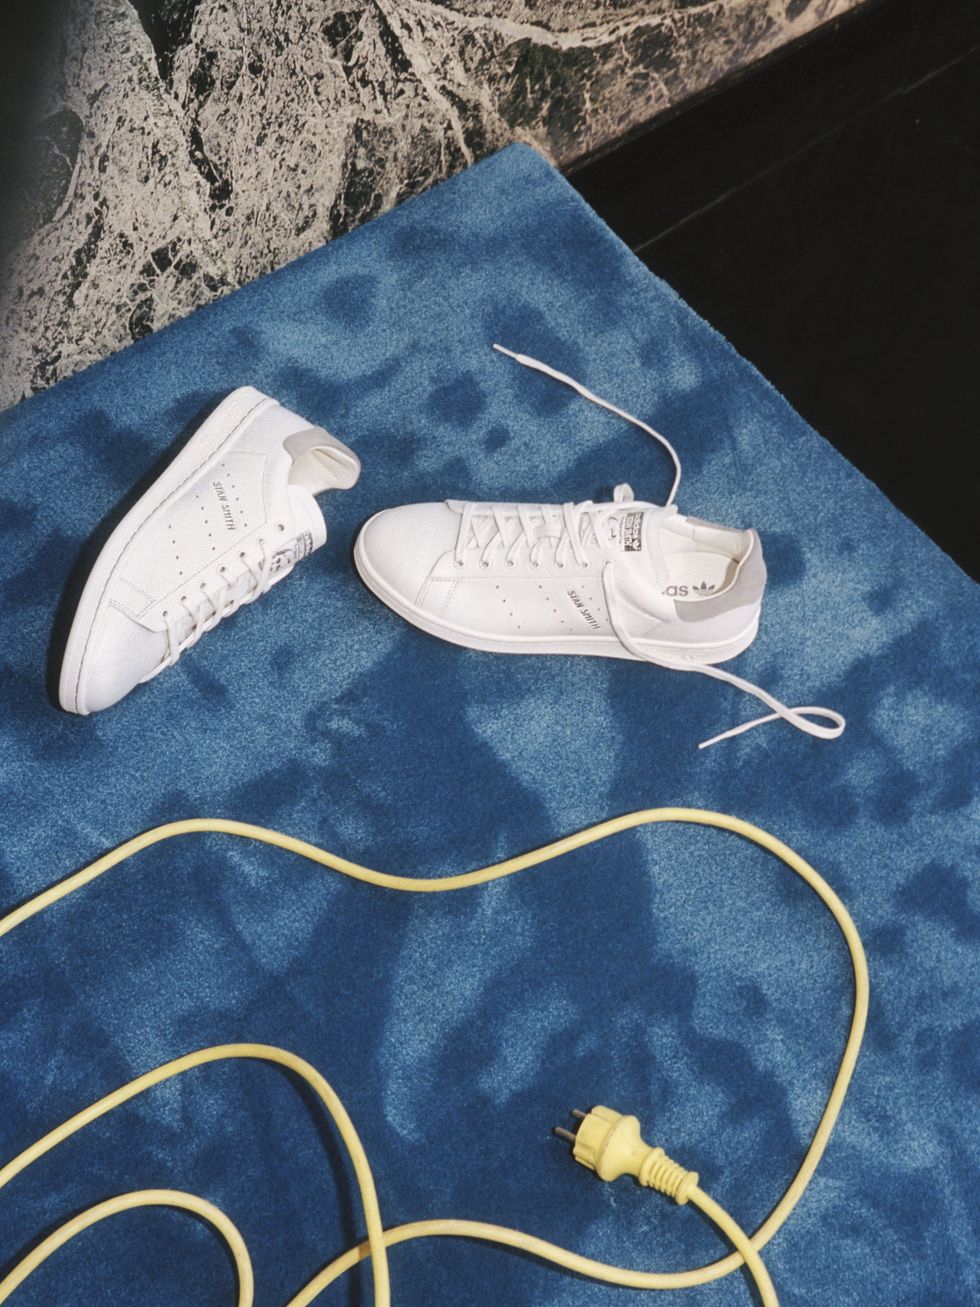 SUPERSTAR OR STAN SMITH??, WOMEN, The ultimate comparison